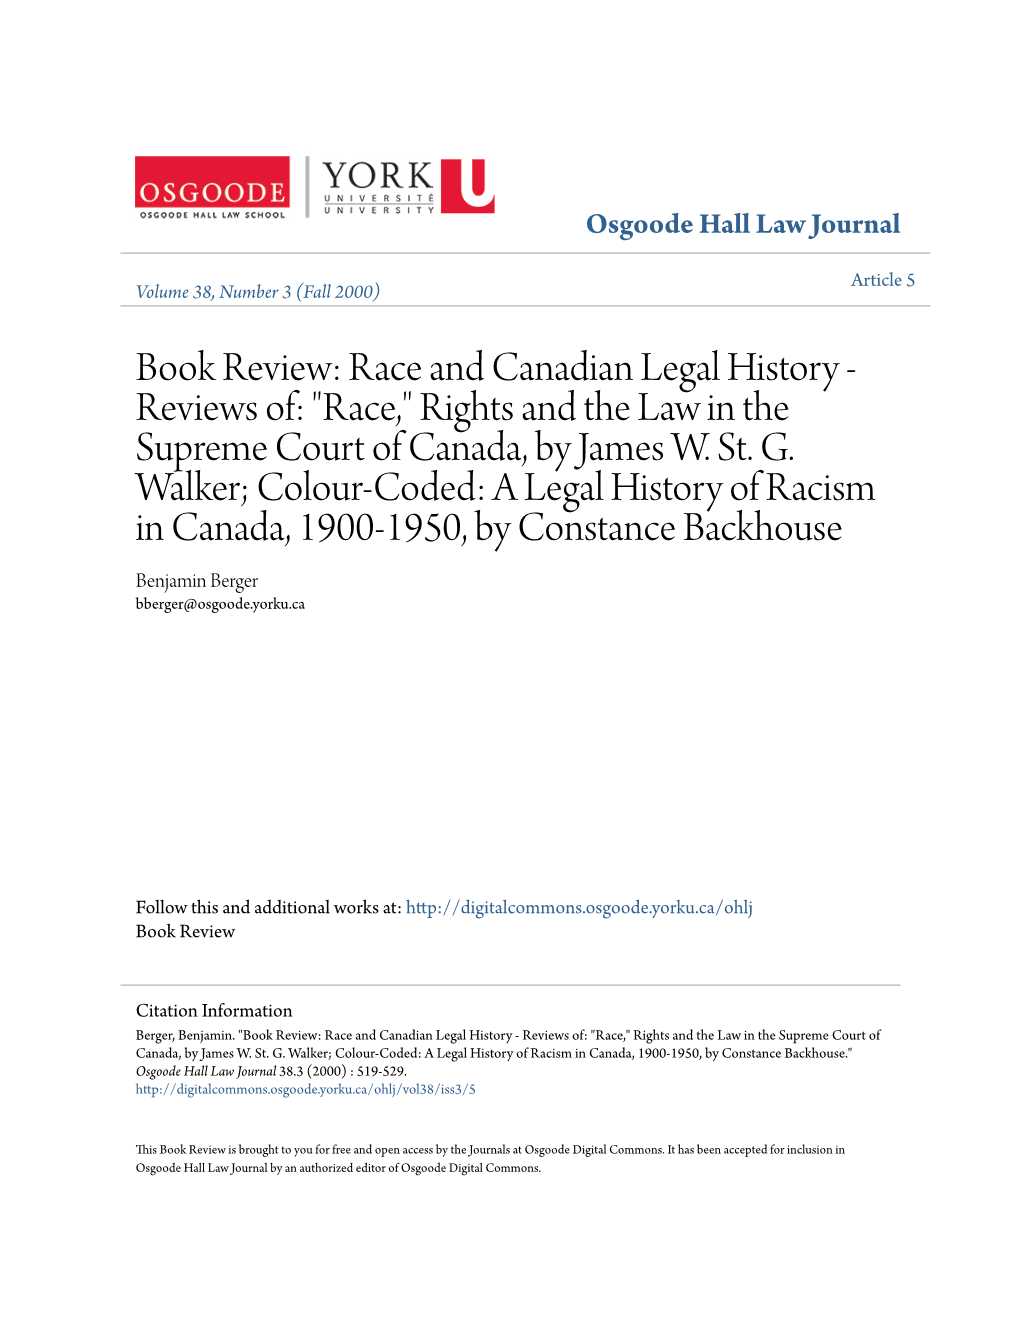 Race and Canadian Legal History - Reviews Of: "Race," Rights and the Law in the Supreme Court of Canada, by James W